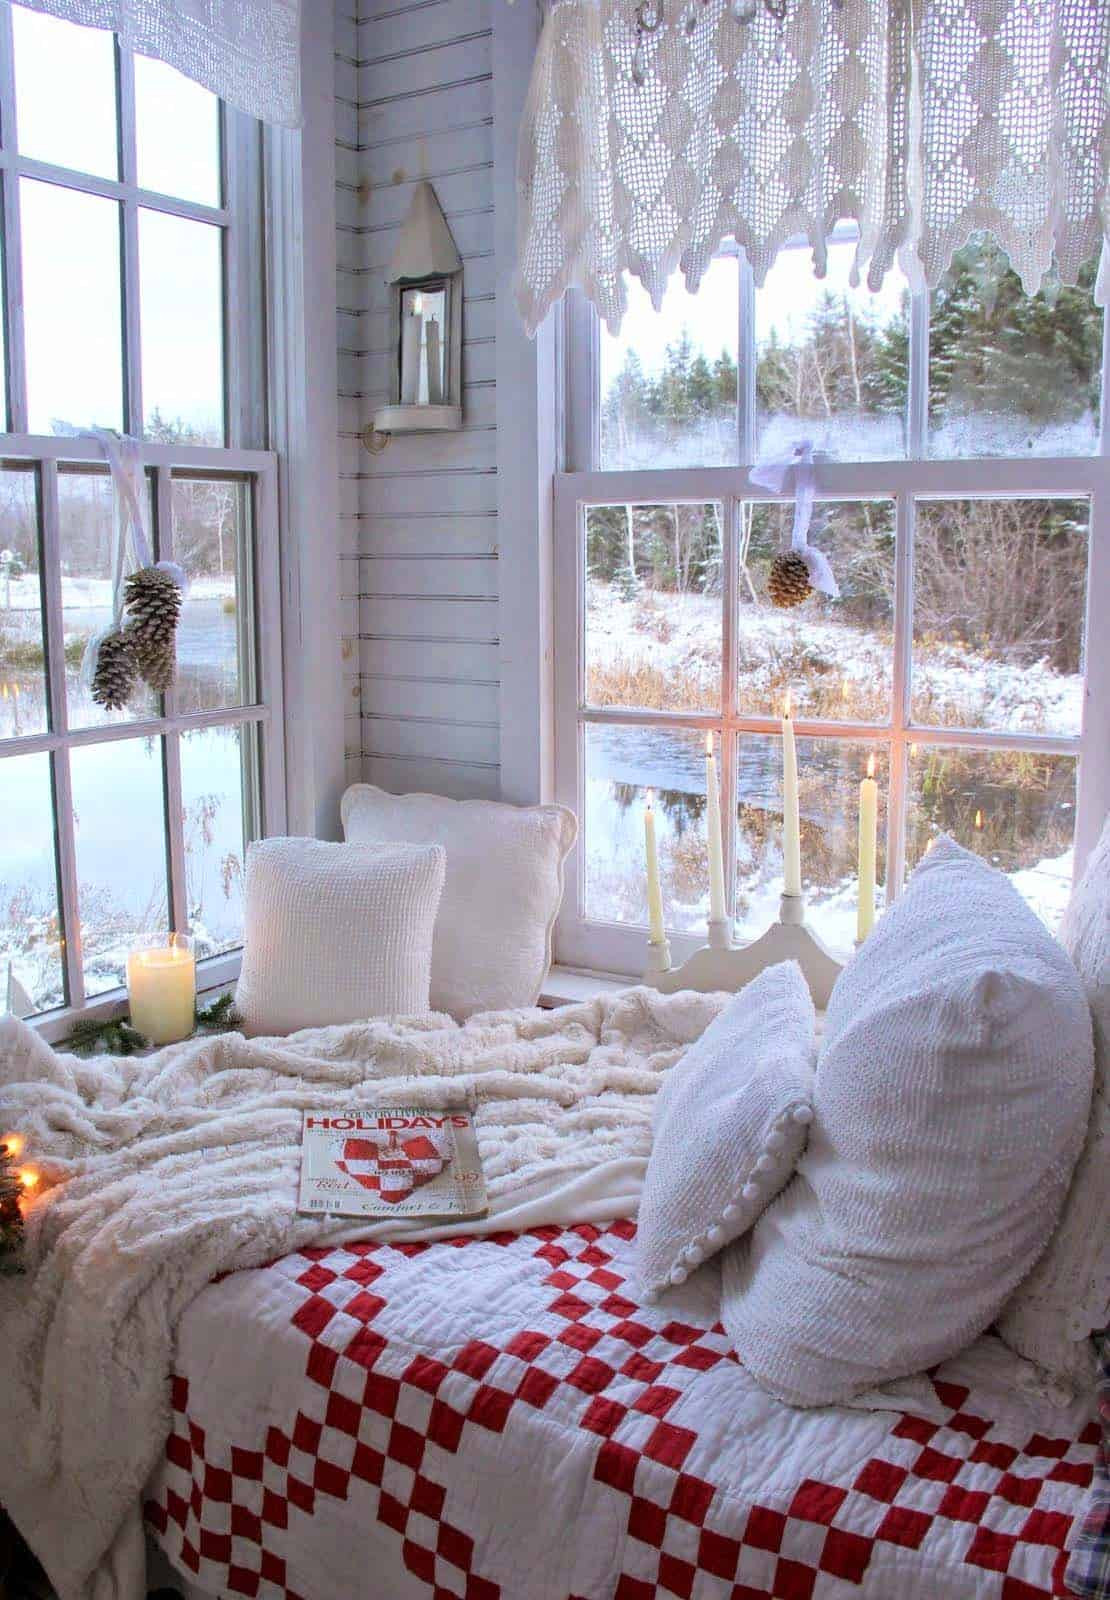 Christmas Bedroom Decor
 35 Ways to create a Christmas wonderland in your bedroom